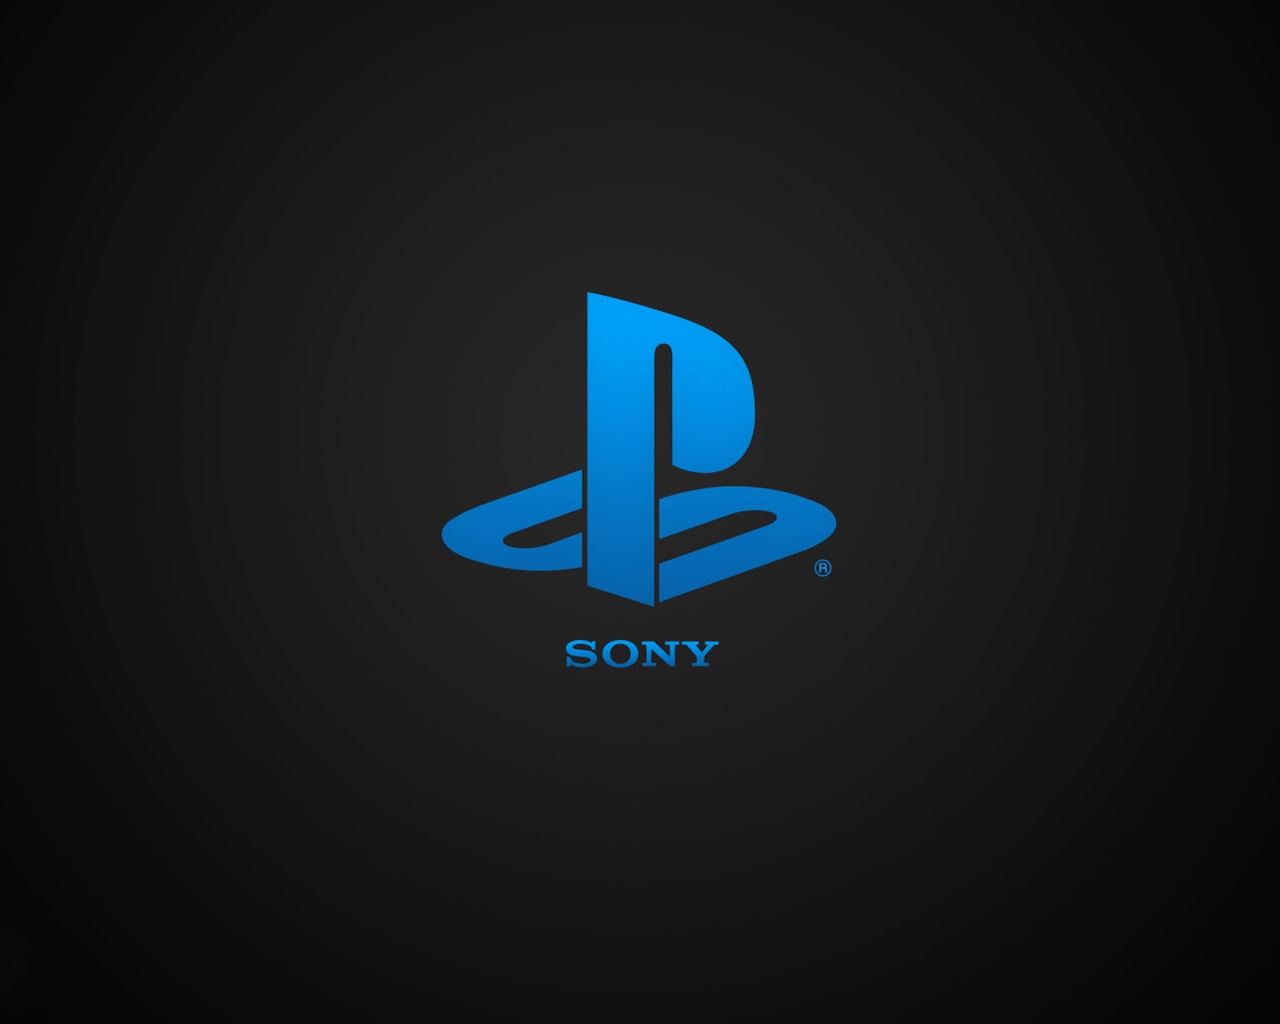 Wallpaper sony playstation blue logo x full hd k picture image